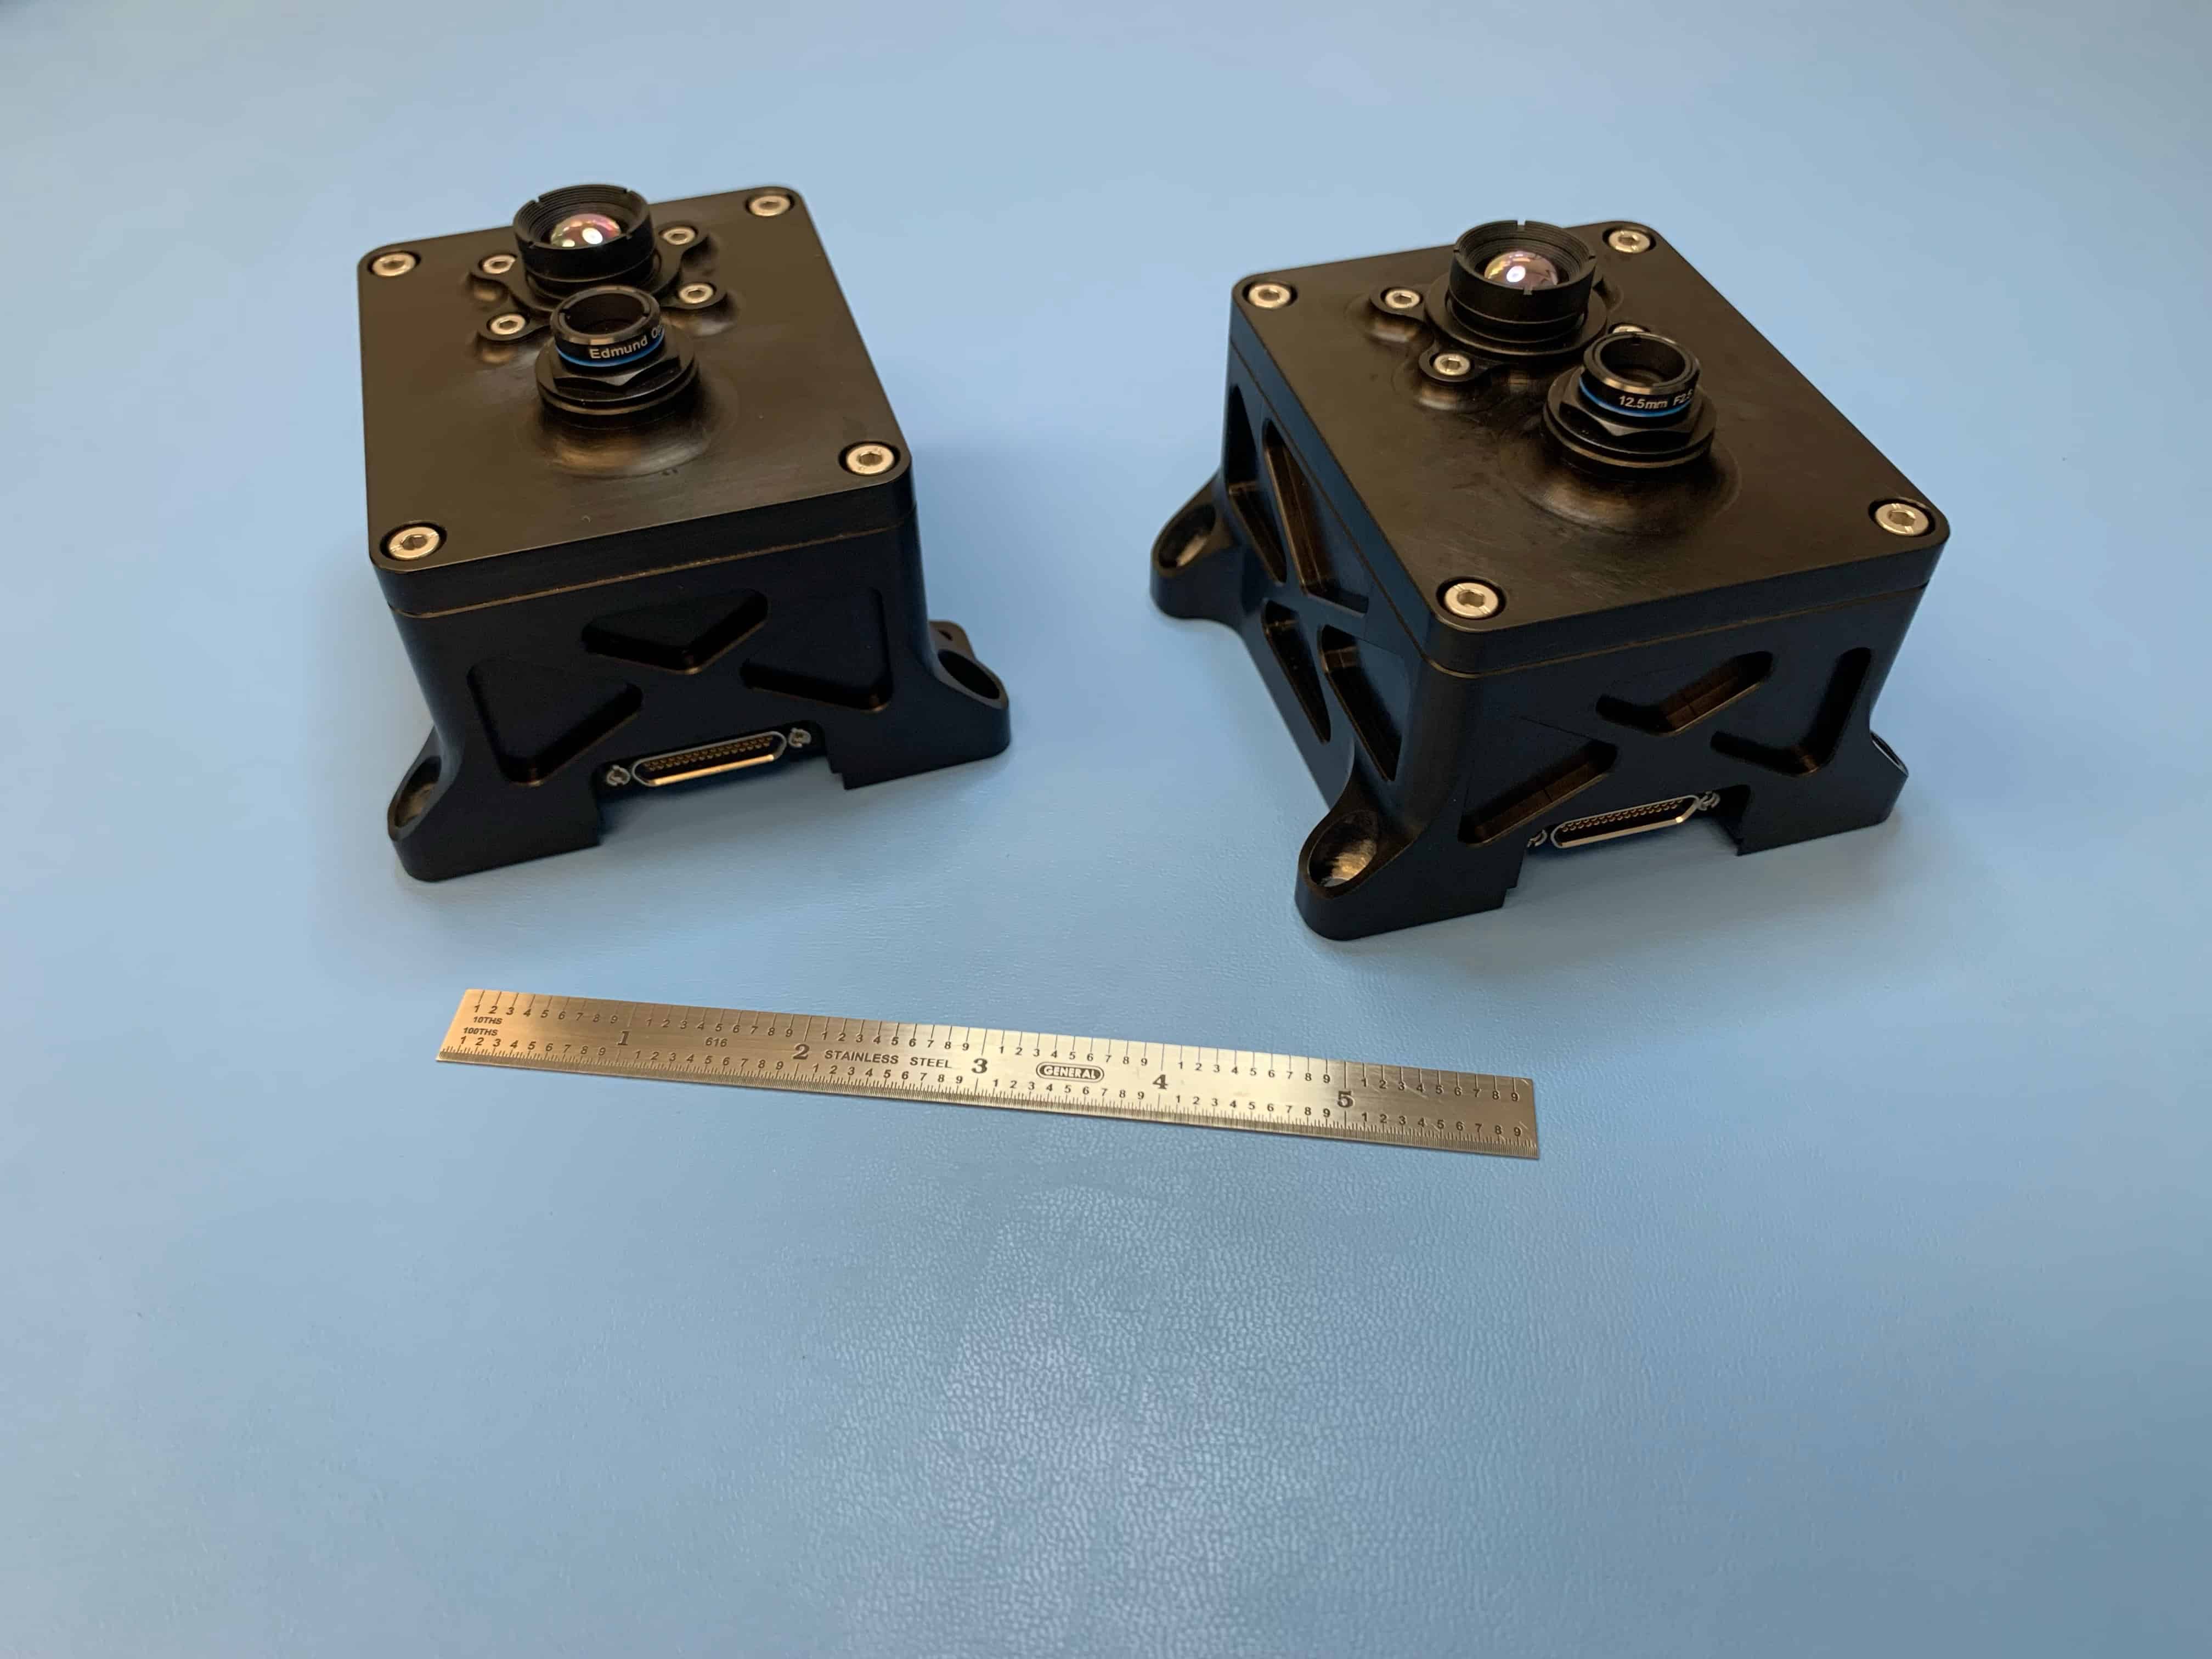 Two VISIONS cameras (square black boxes) against a blue backdrop.